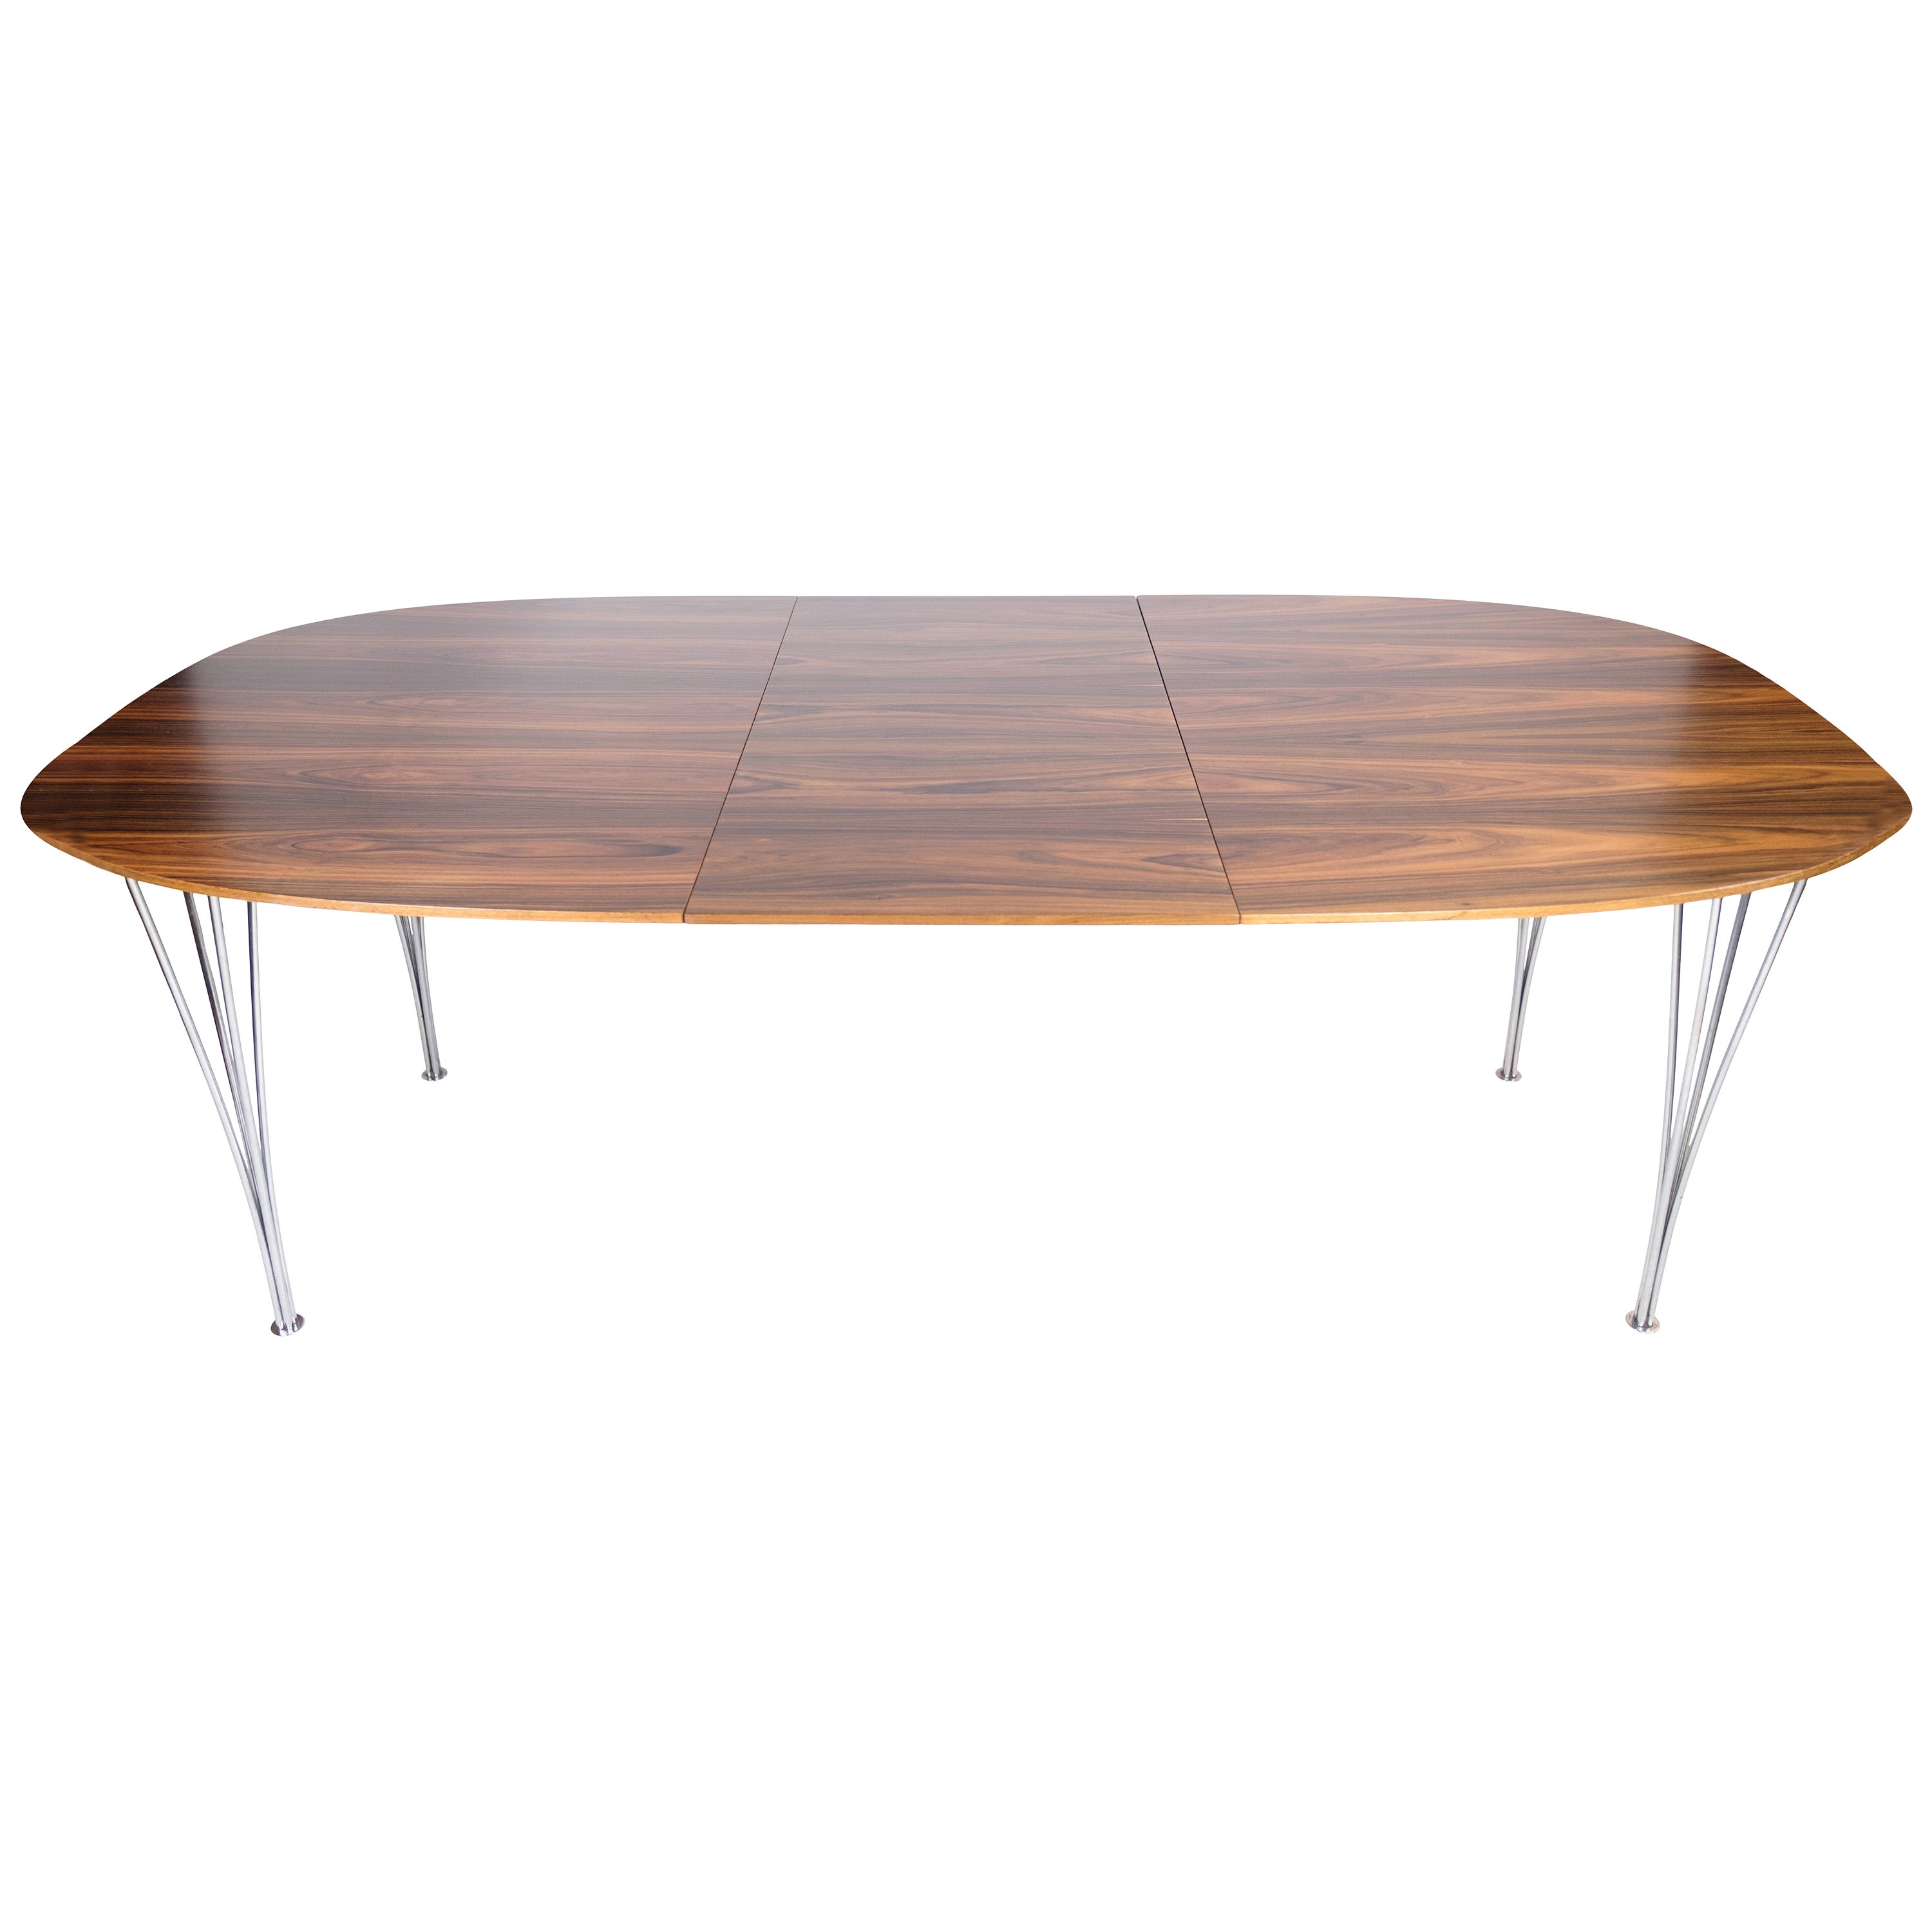 Dining Table Made In Rosewood By Piet Hein & Bruno Mathsson From 1960s For Sale